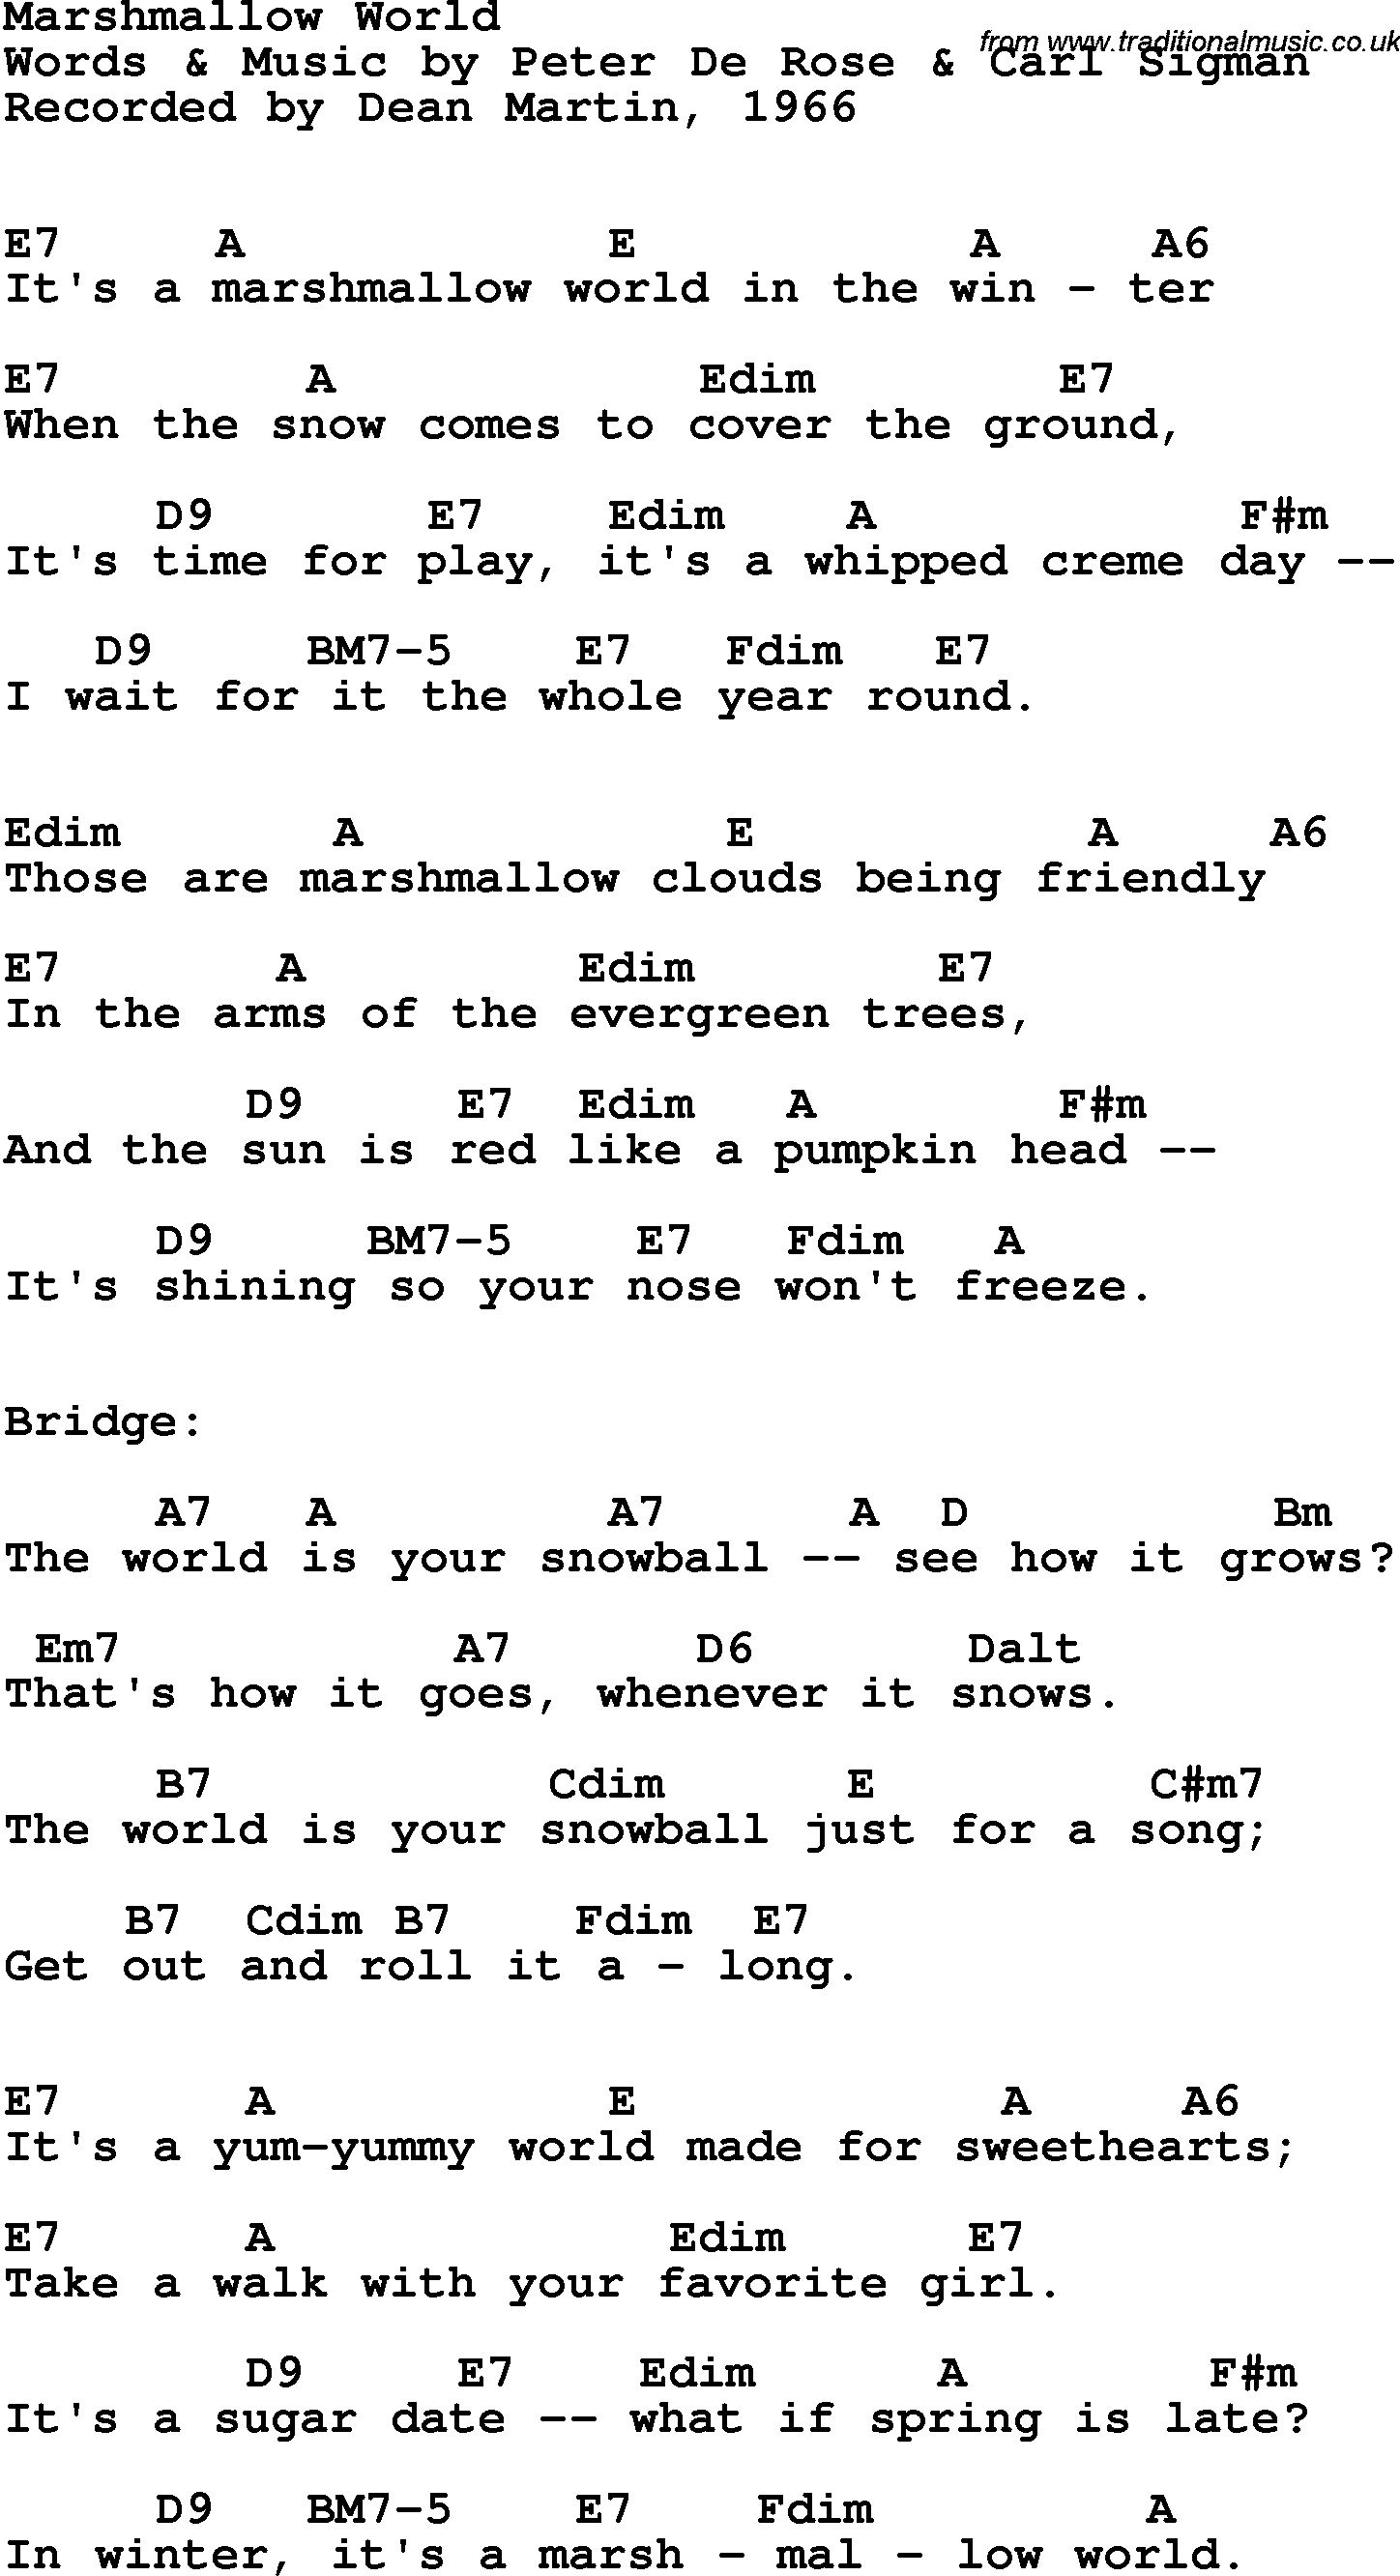 Song Lyrics With Guitar Chords For Marshmallow World Dean Martin